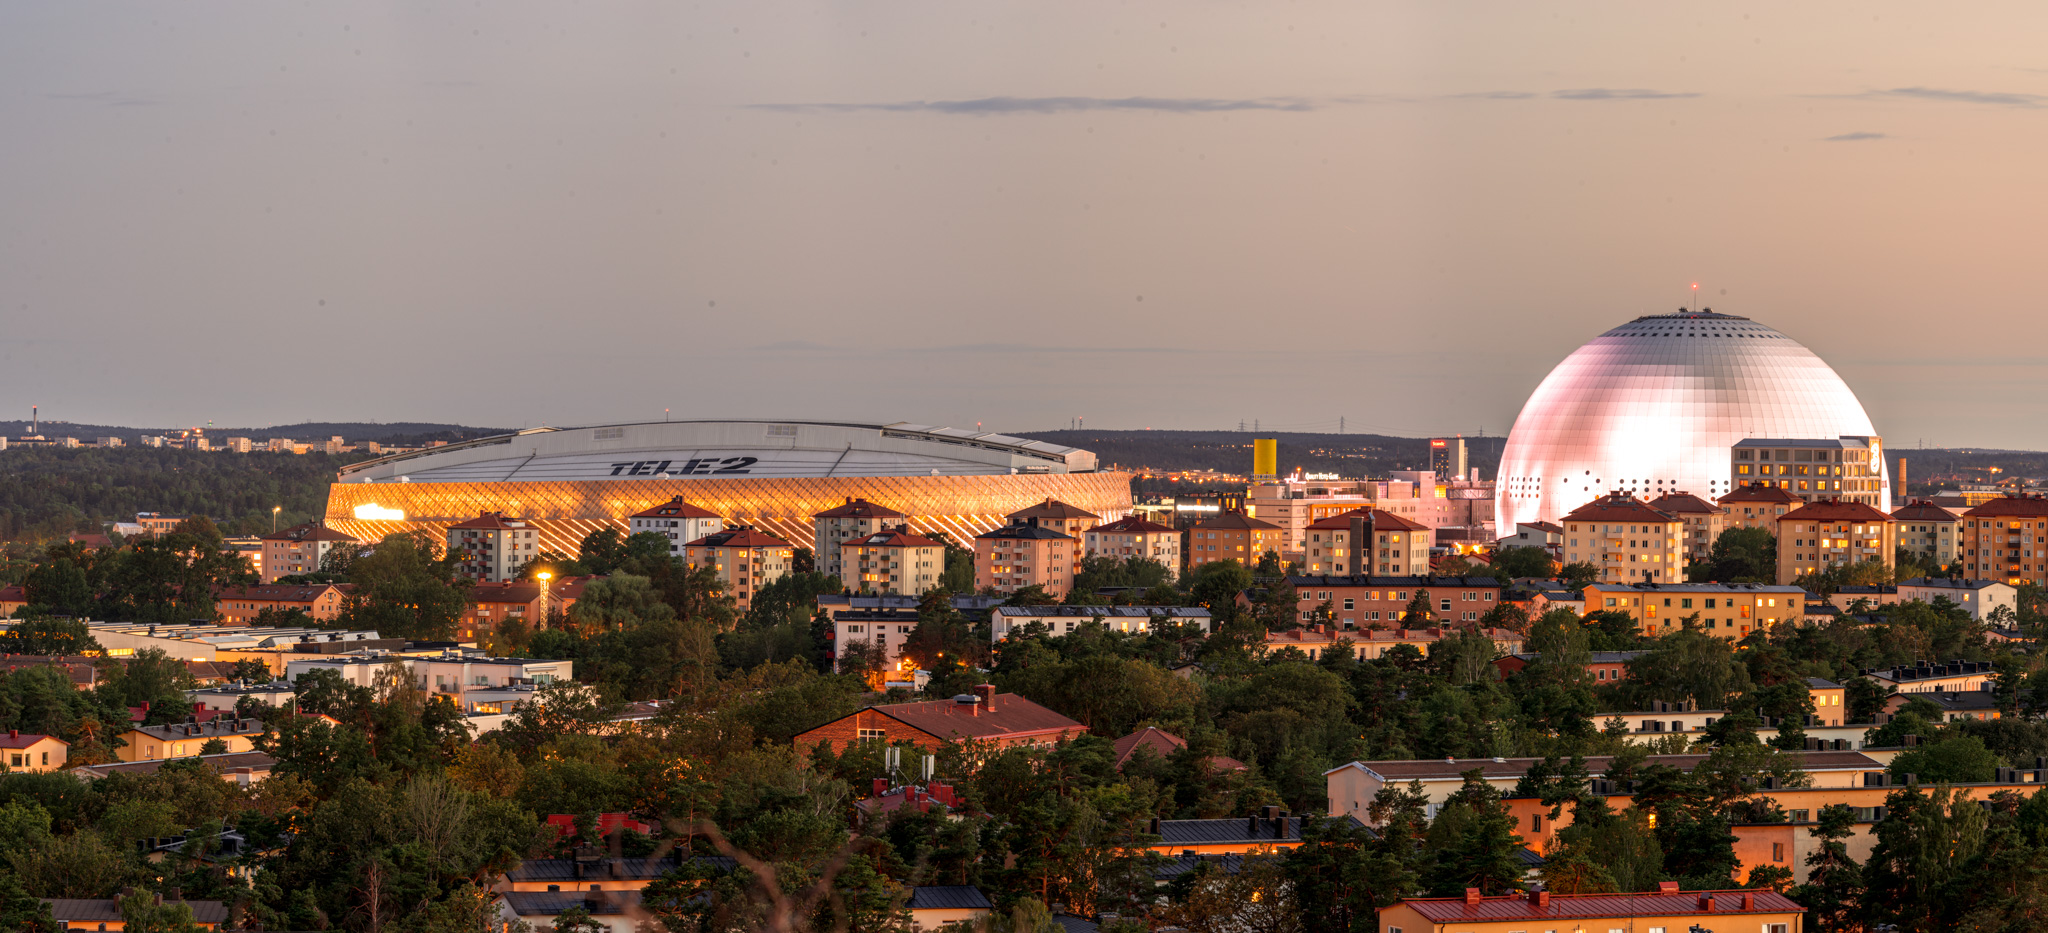 Tele2 arena and Globen during blue hour